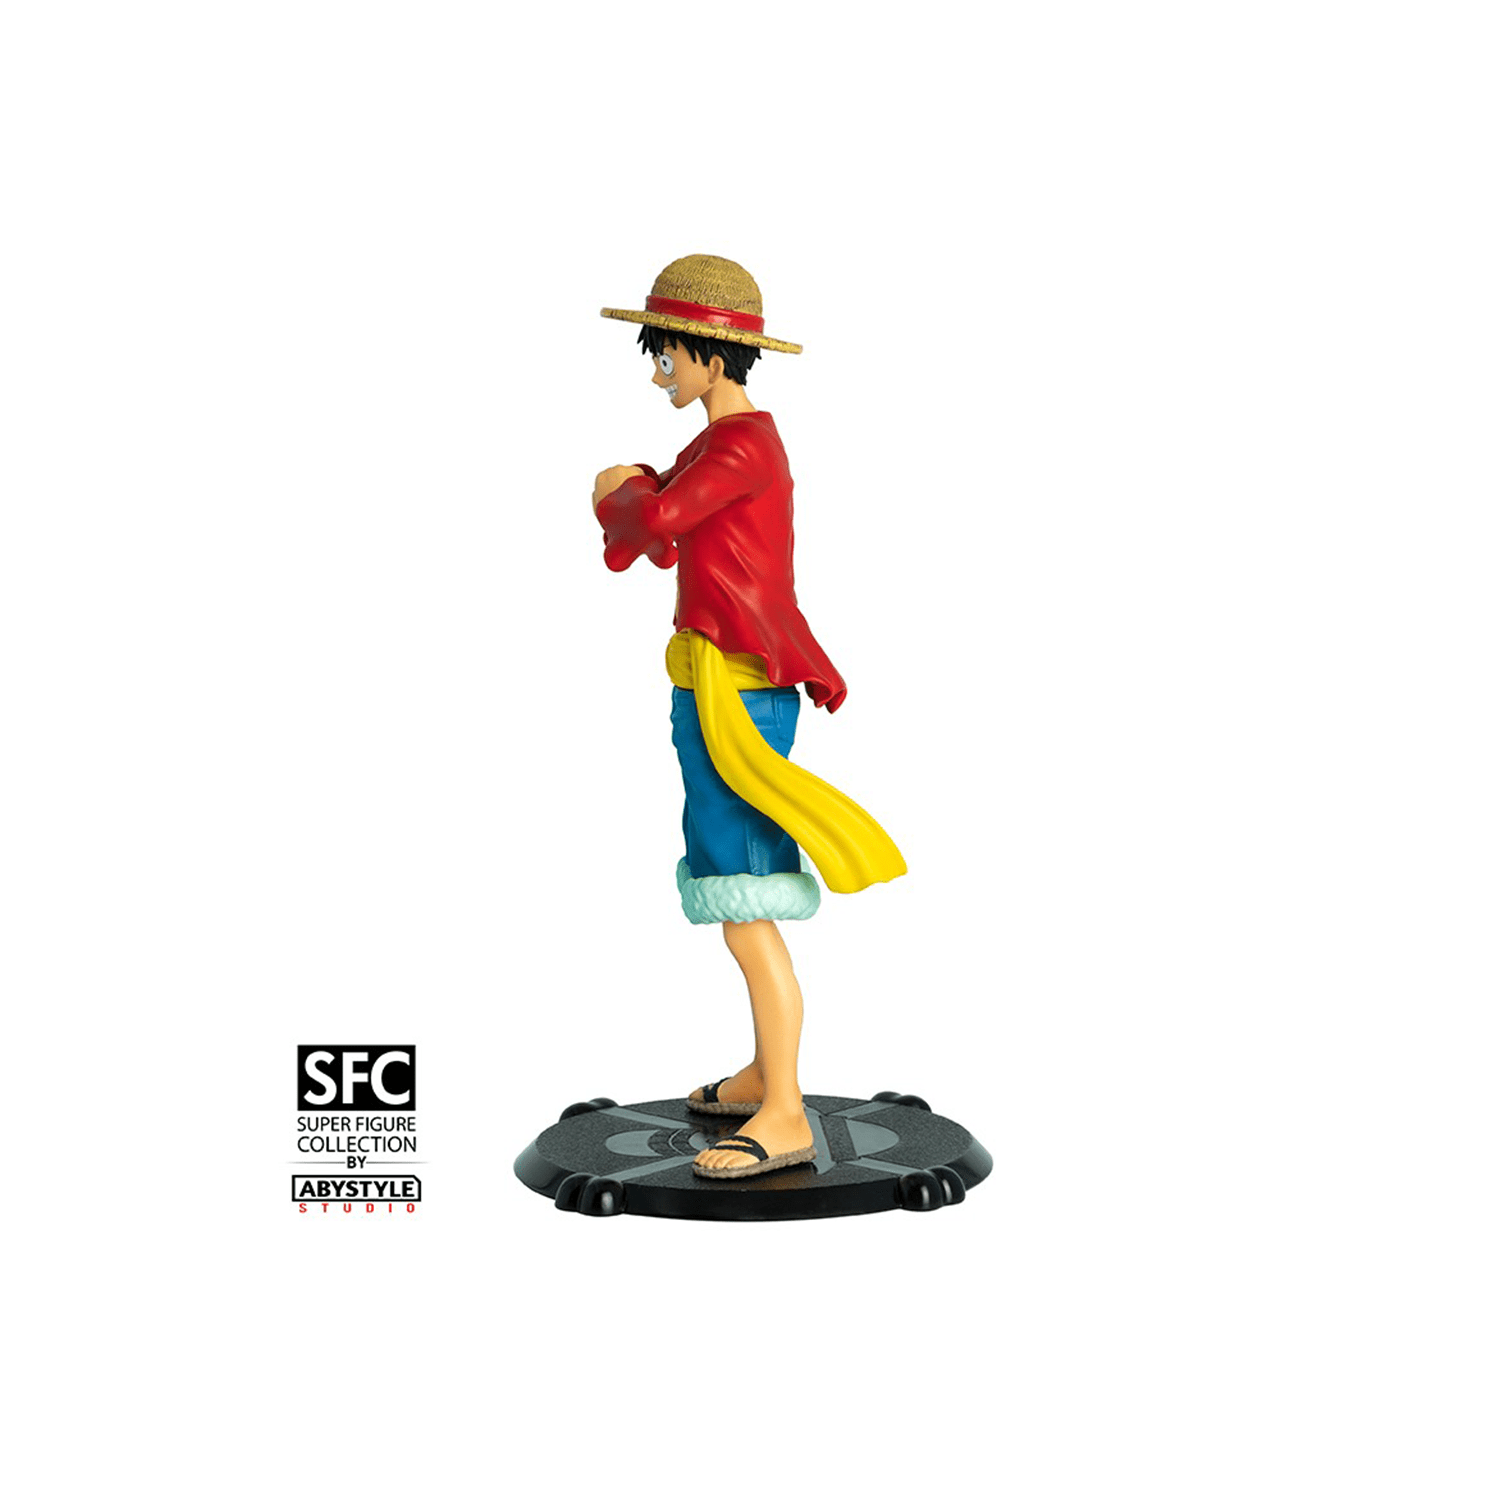 New and used Luffy One Piece Action Figures for sale